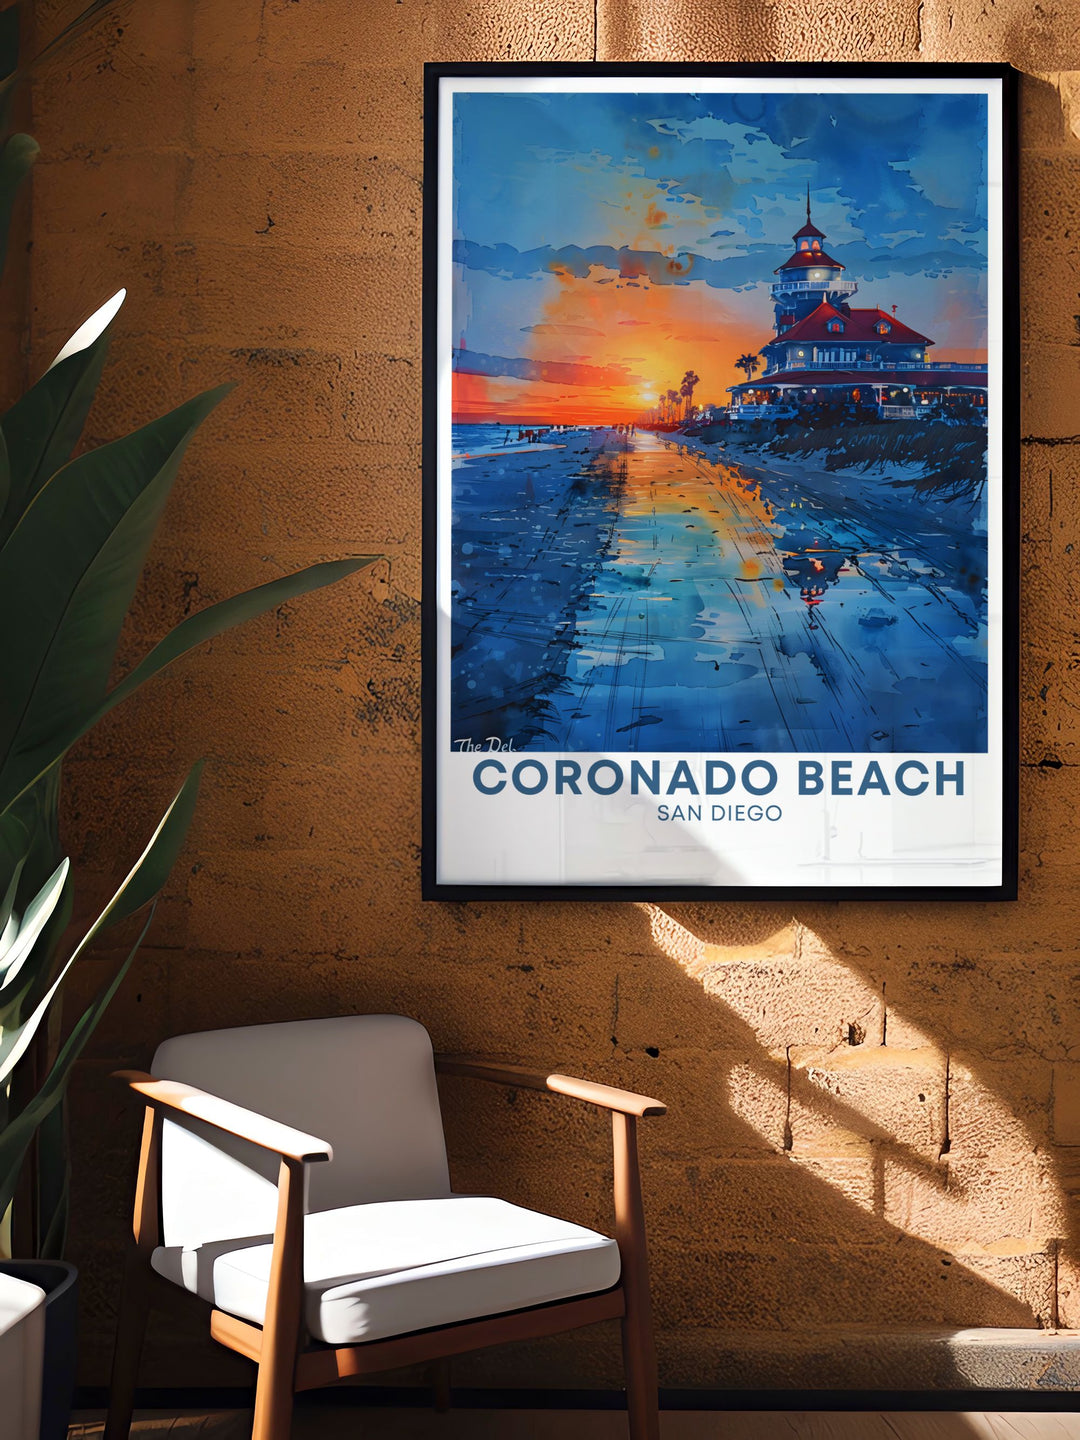 Perfect for ski enthusiasts and history buffs alike our Vail Ski Gift and Hotel de Coronado artwork offer a unique combination of Colorados natural beauty and historic elegance. These prints make wonderful gifts for any occasion.